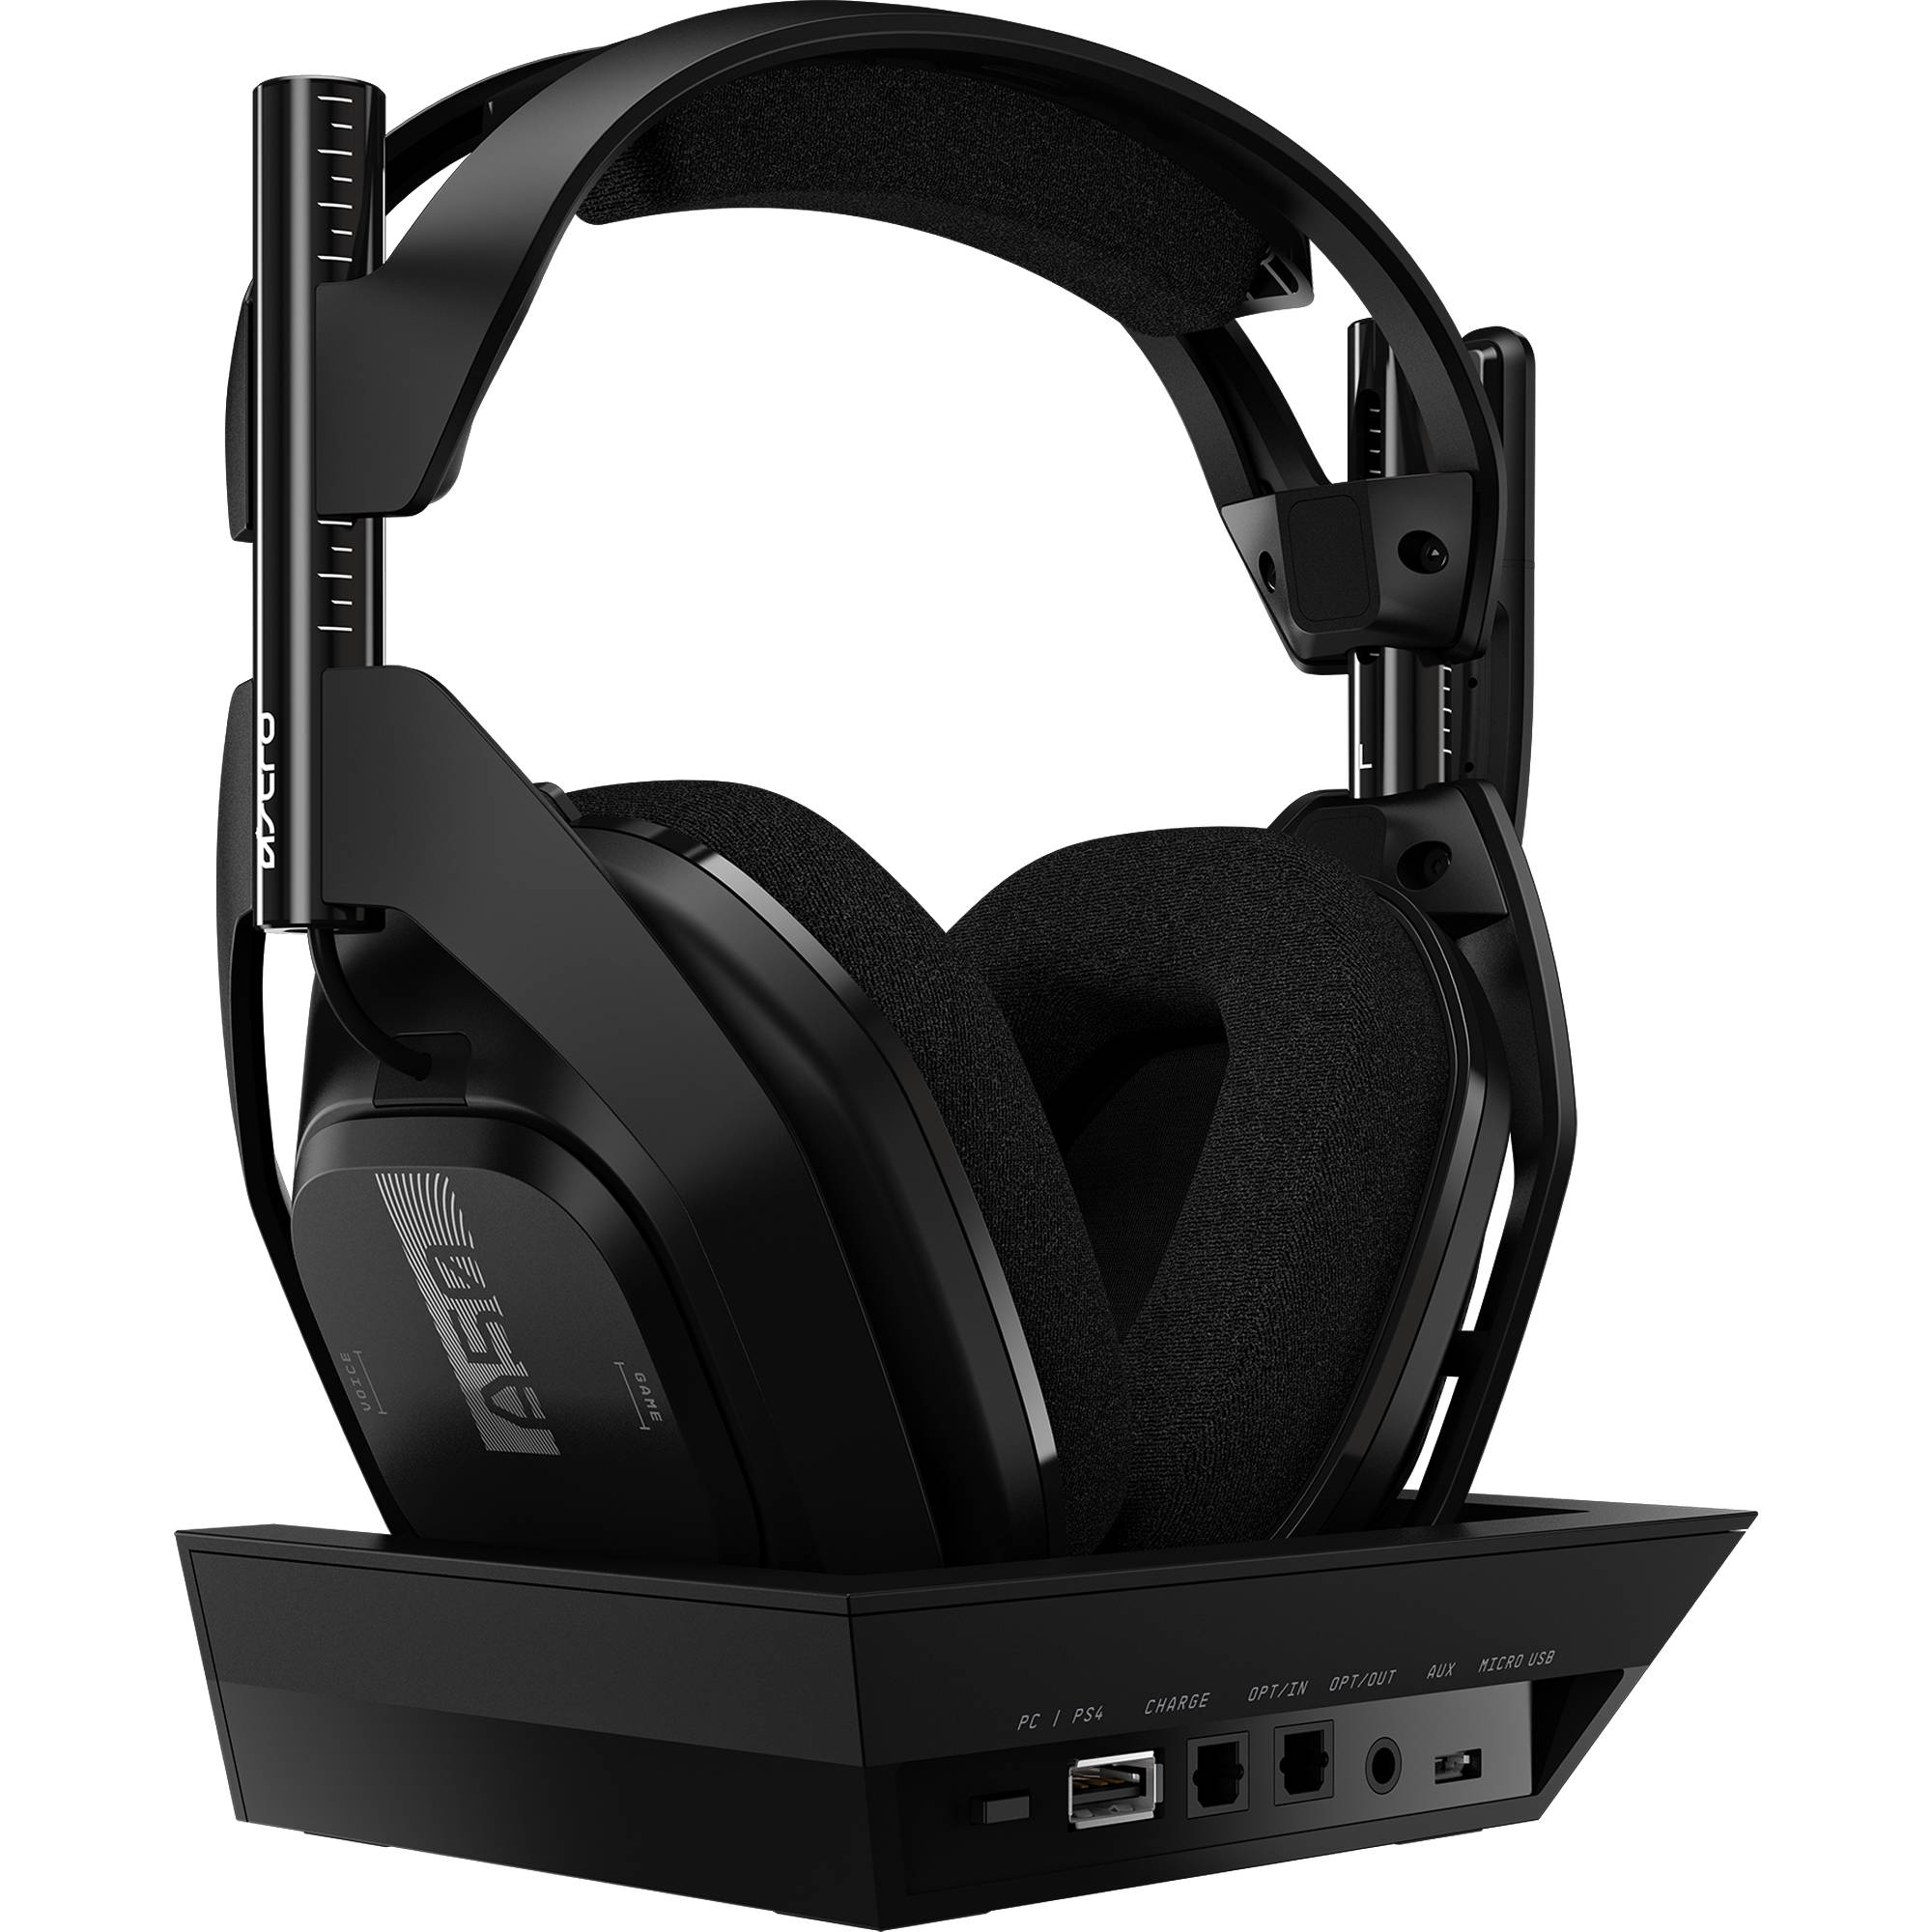 Astro Gaming A50 Wireless Gaming Headset With Base Station Black Gray For Windows Mac And Ps4